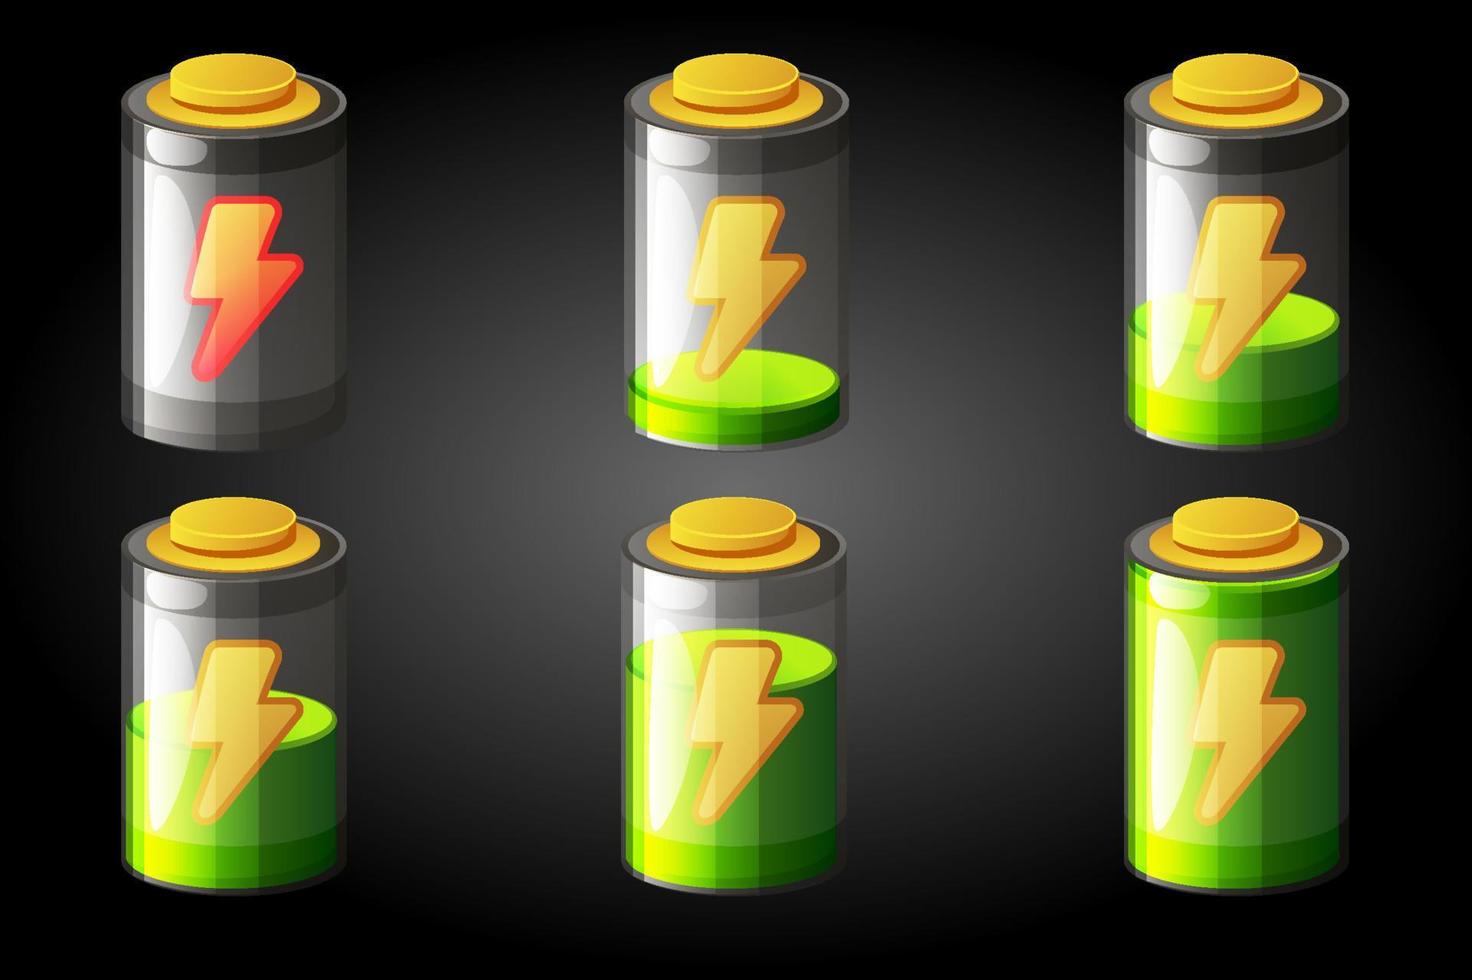 Bar energy batteries from charged to discharged for the game. Vector illustration isolated phone battery icons for graphic design.